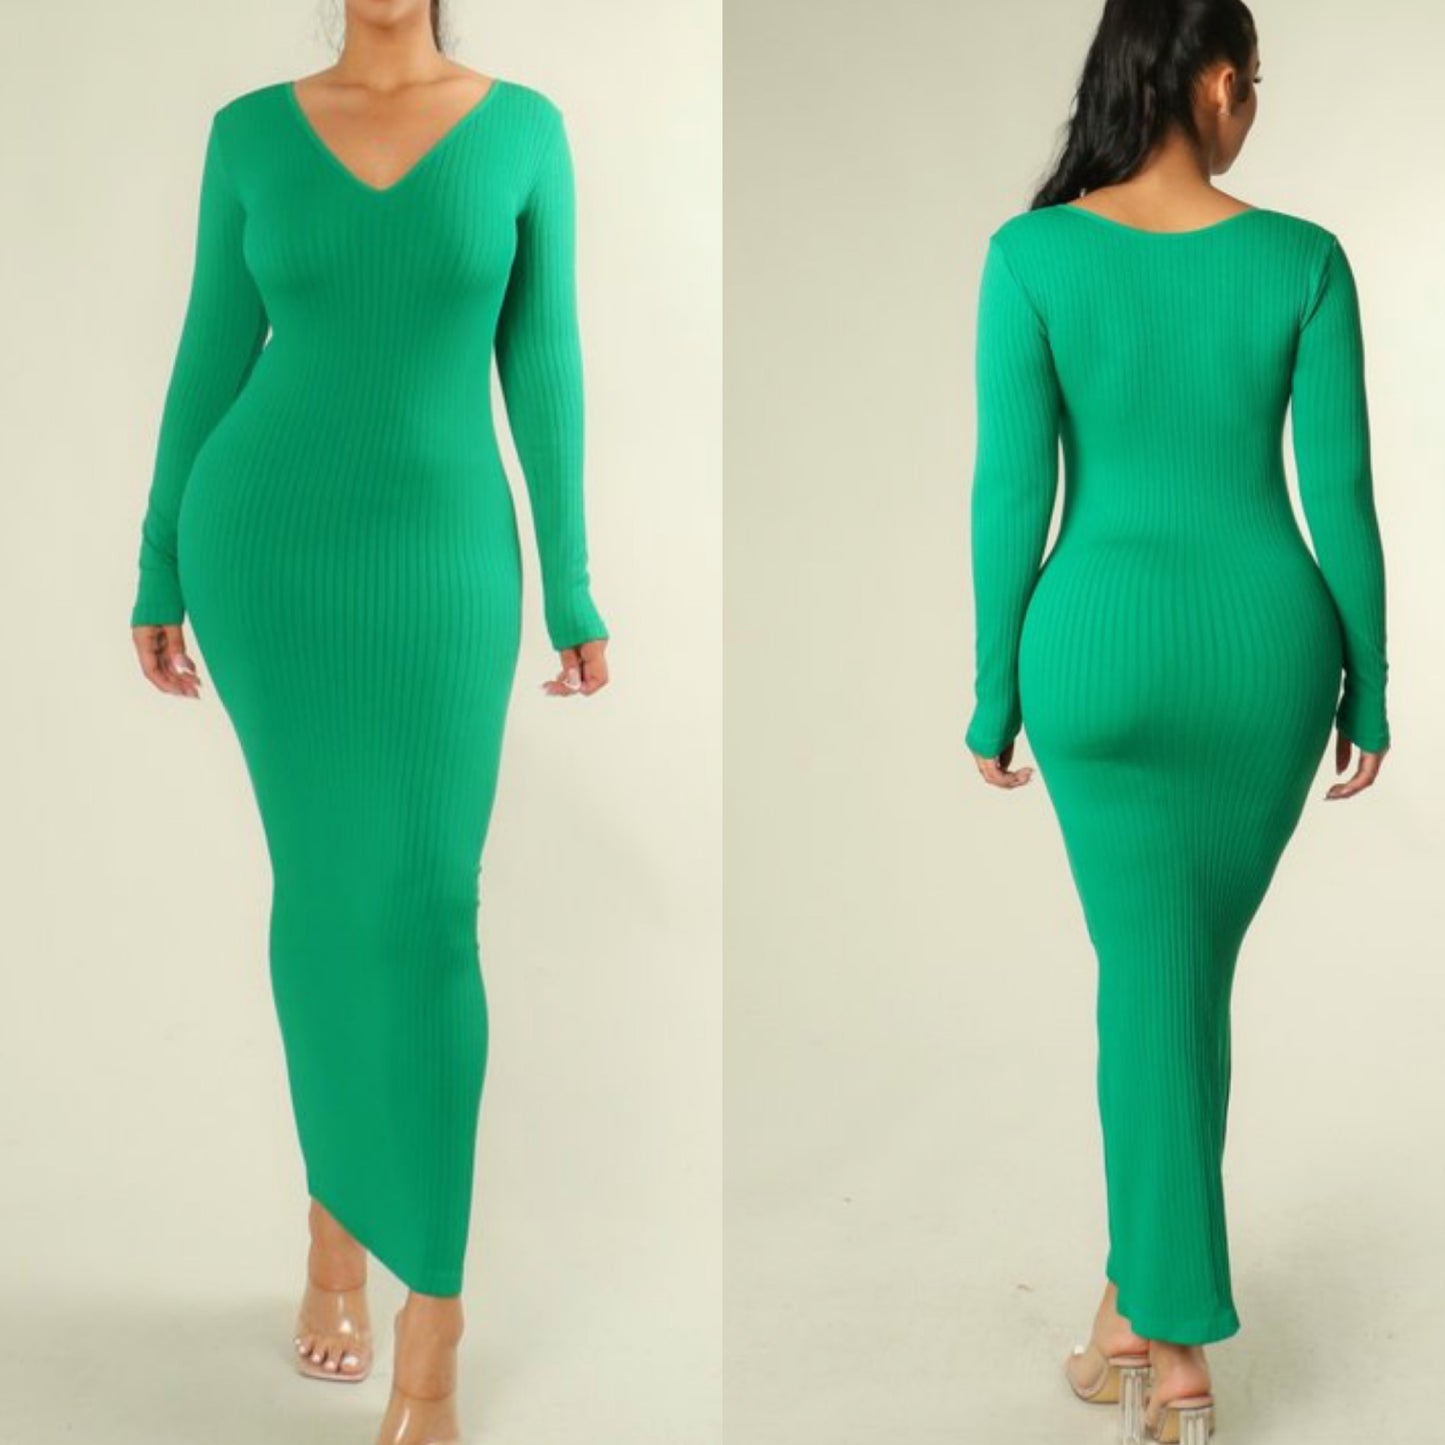 SOLID COLOR PATTERN RIBBED BODYCON LONG SLEEVE MIDI PENCIL DRESS .
V-NECK.
SUPER STRETCH